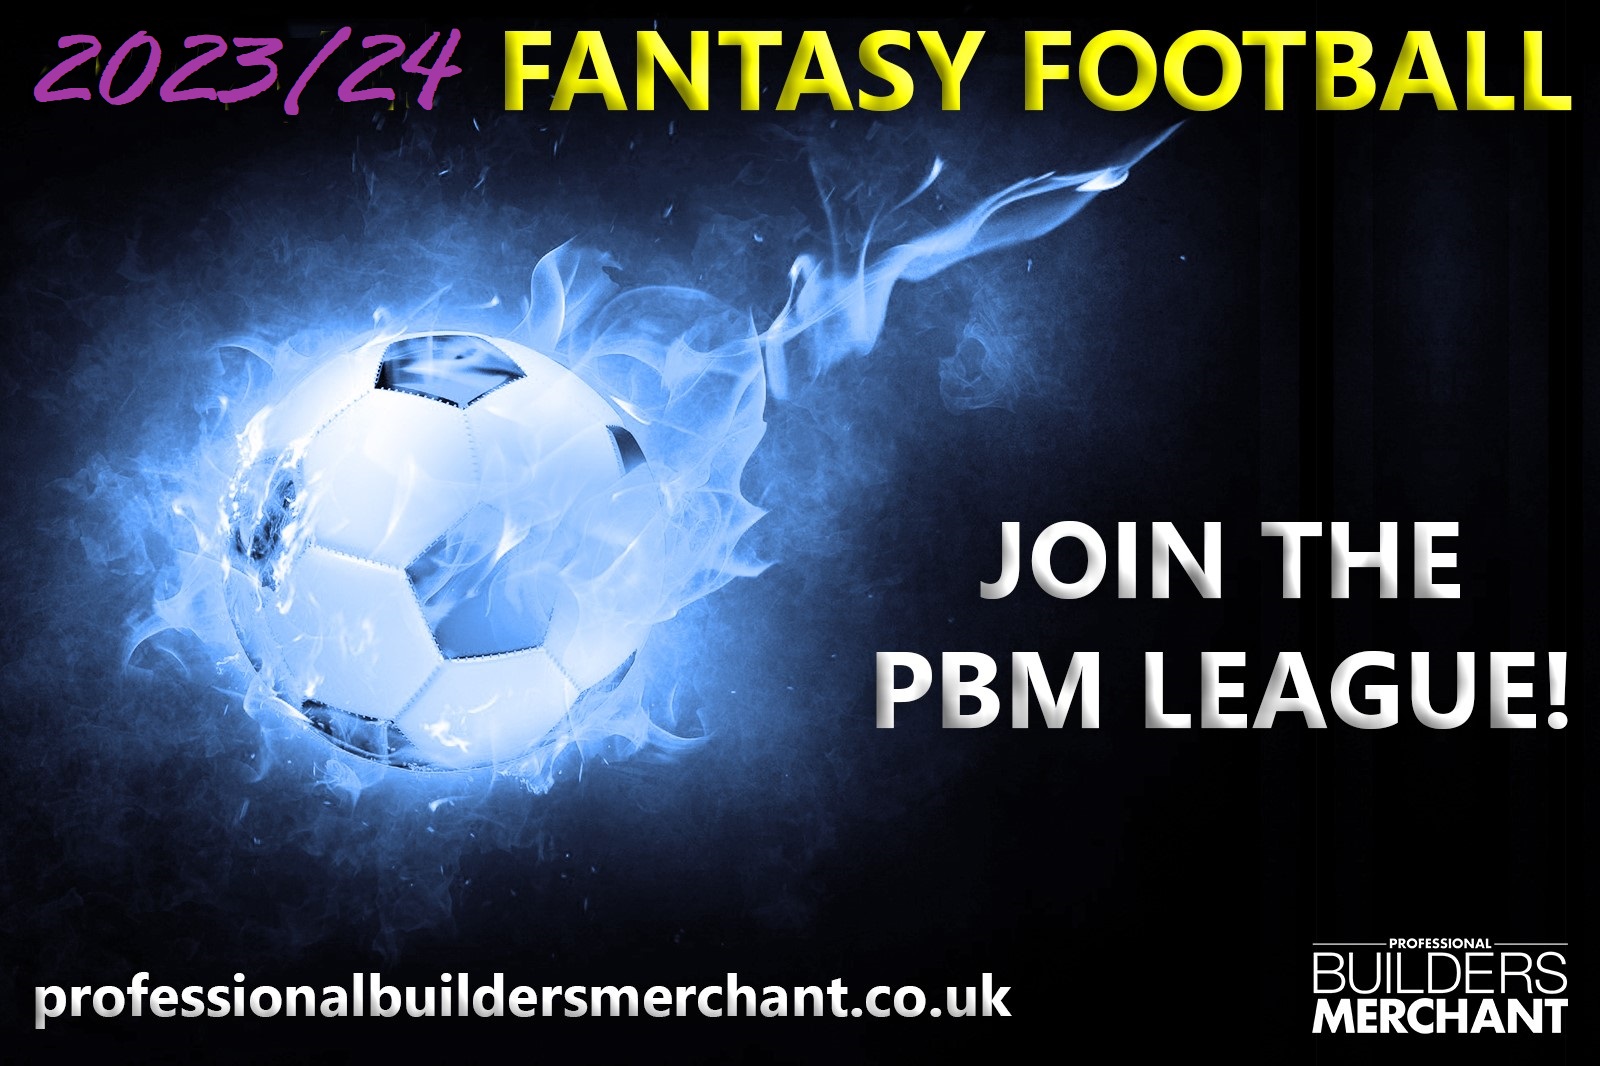 Pick your official Fantasy Premier League (FPL) Fantasy Football team and join the PBM mini-league now for the new 2023/24 season!